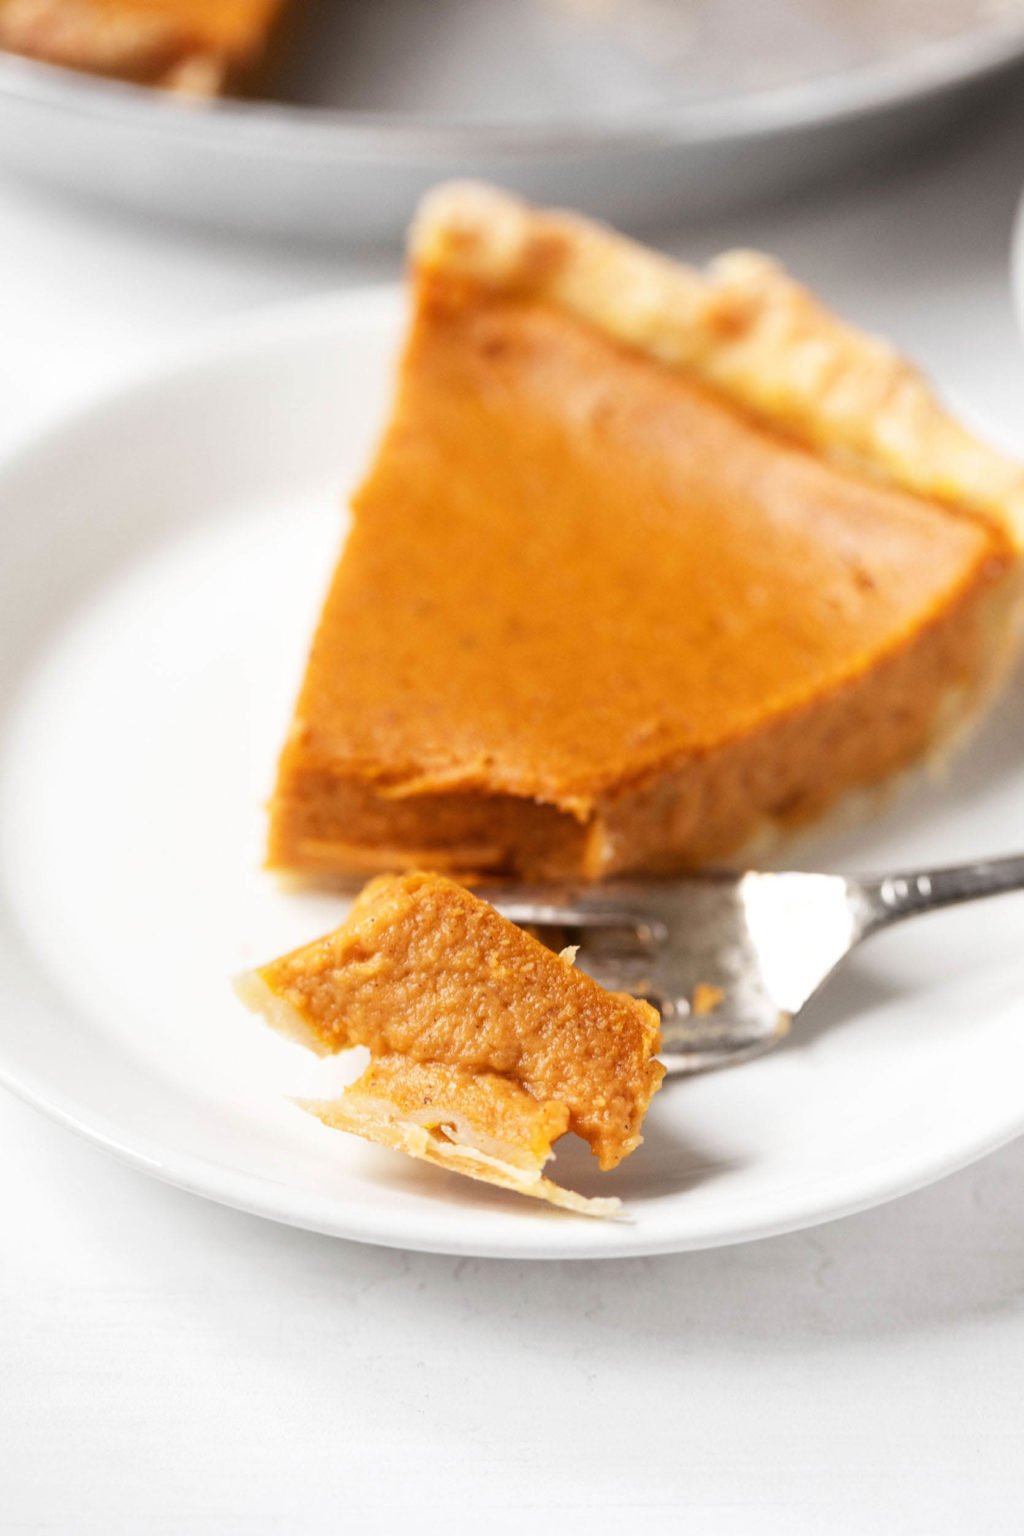 A single slice of vegan pumpkin pie has been cut into with a metal fork. It has a firm, light orange interior.